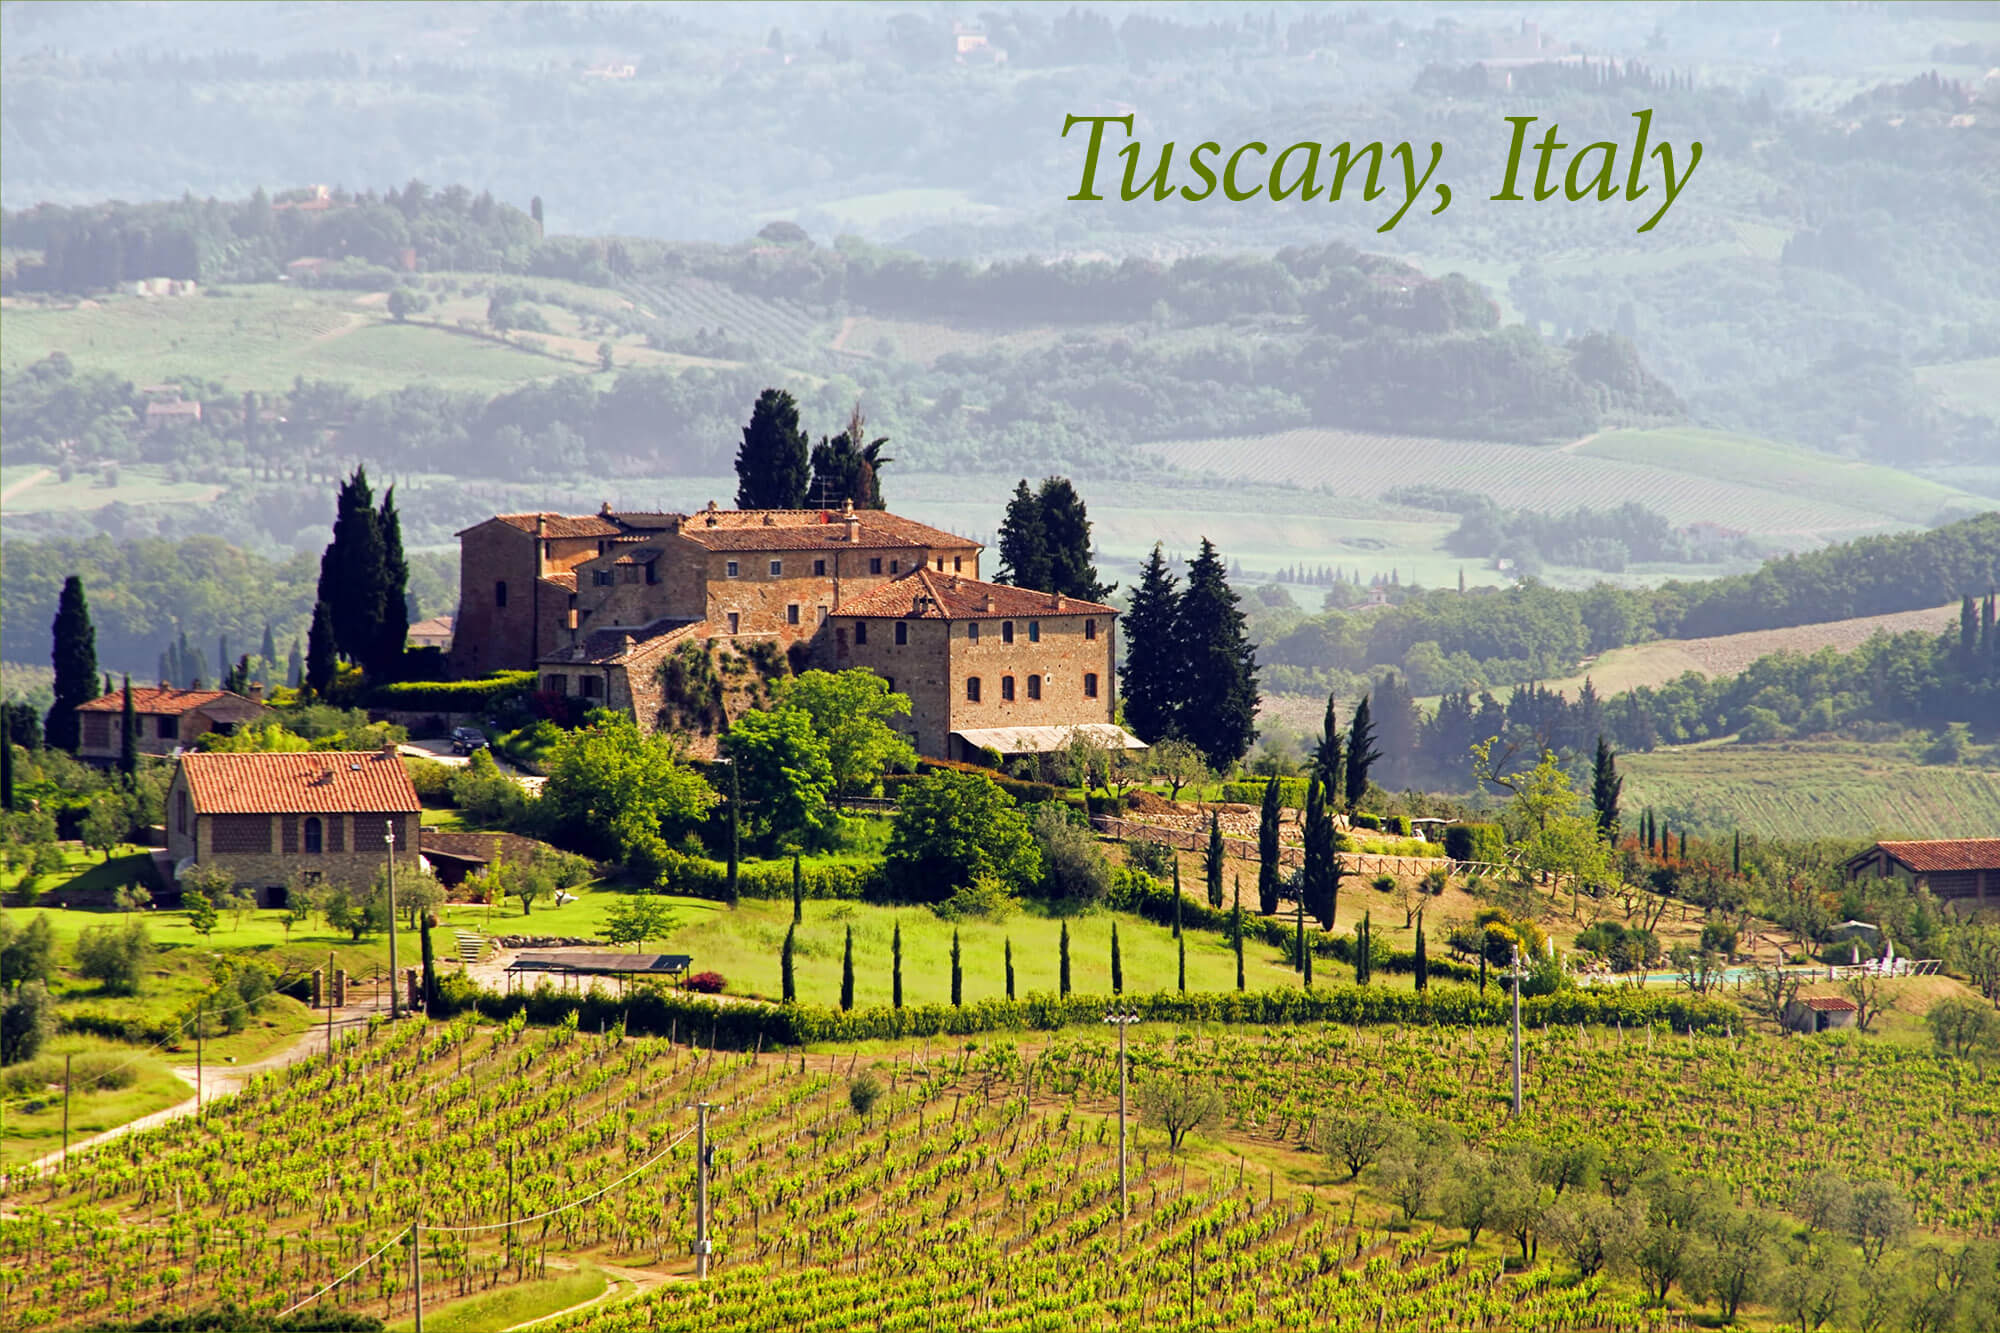 Image for Tuscany trip press release.